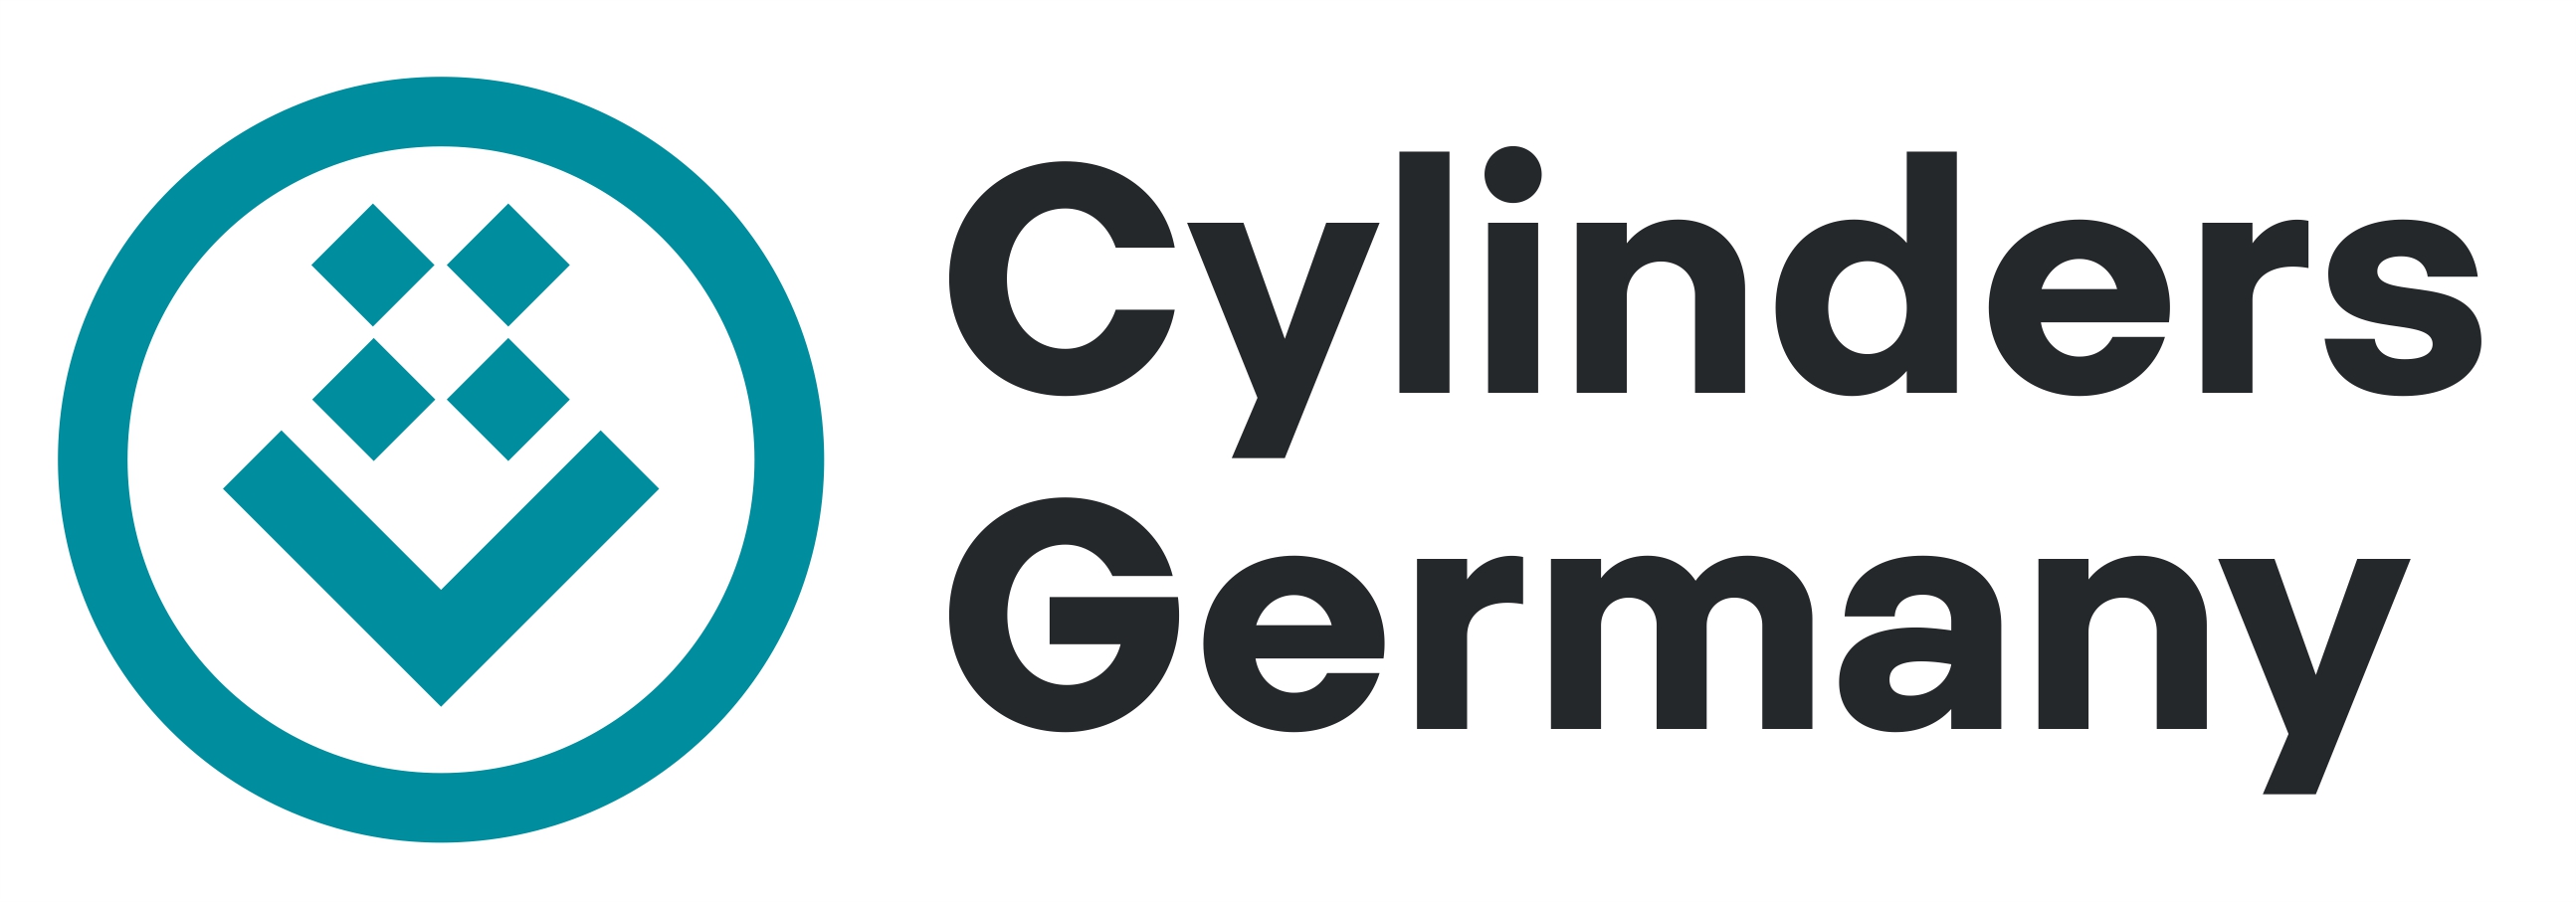 Cylinders Germany starts in september